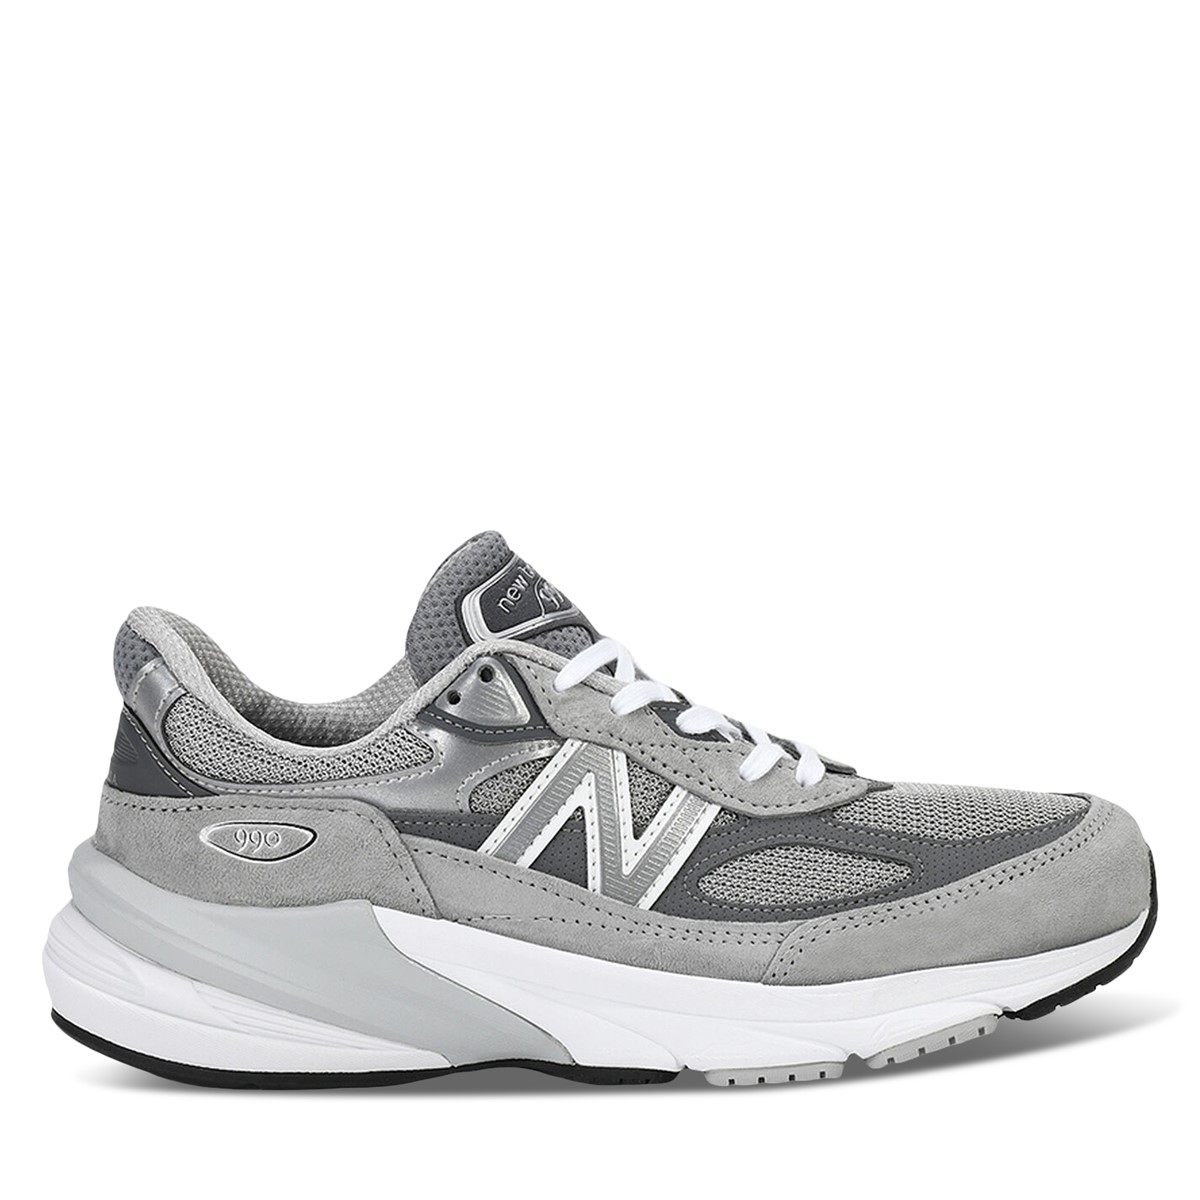 Women's Made in USA 990v6 Sneakers in Grey